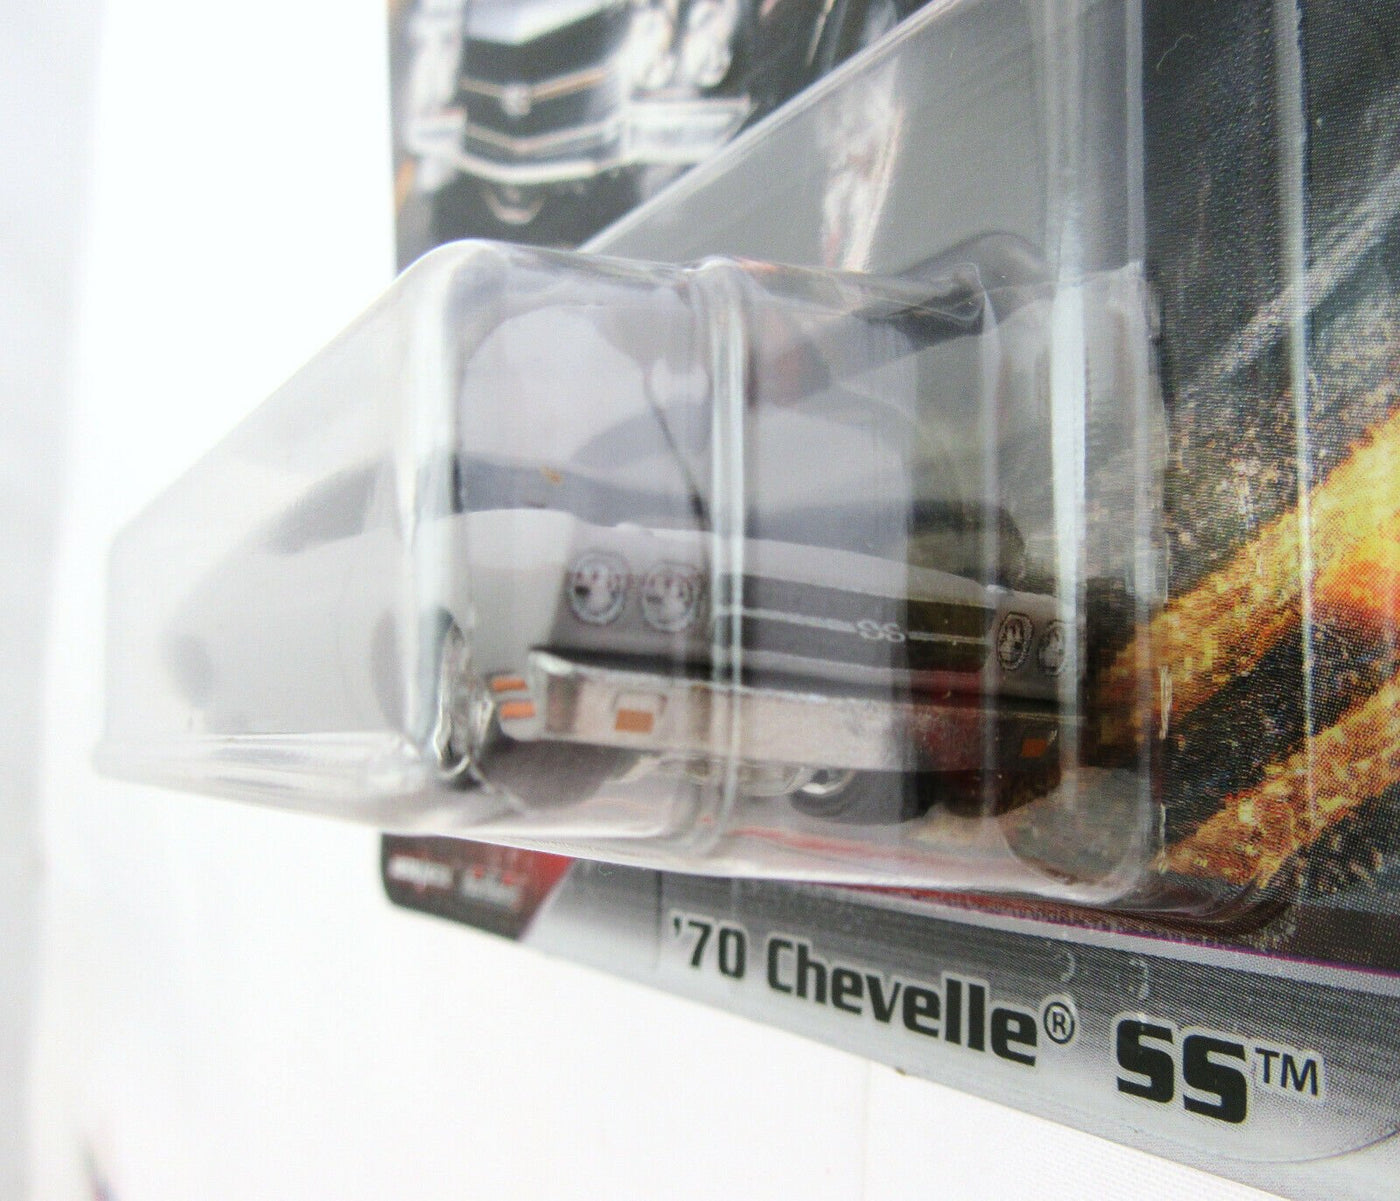 1970 Chevelle SS ~ Hot Wheels ~ Fast & Furious ~  1:64 Scale